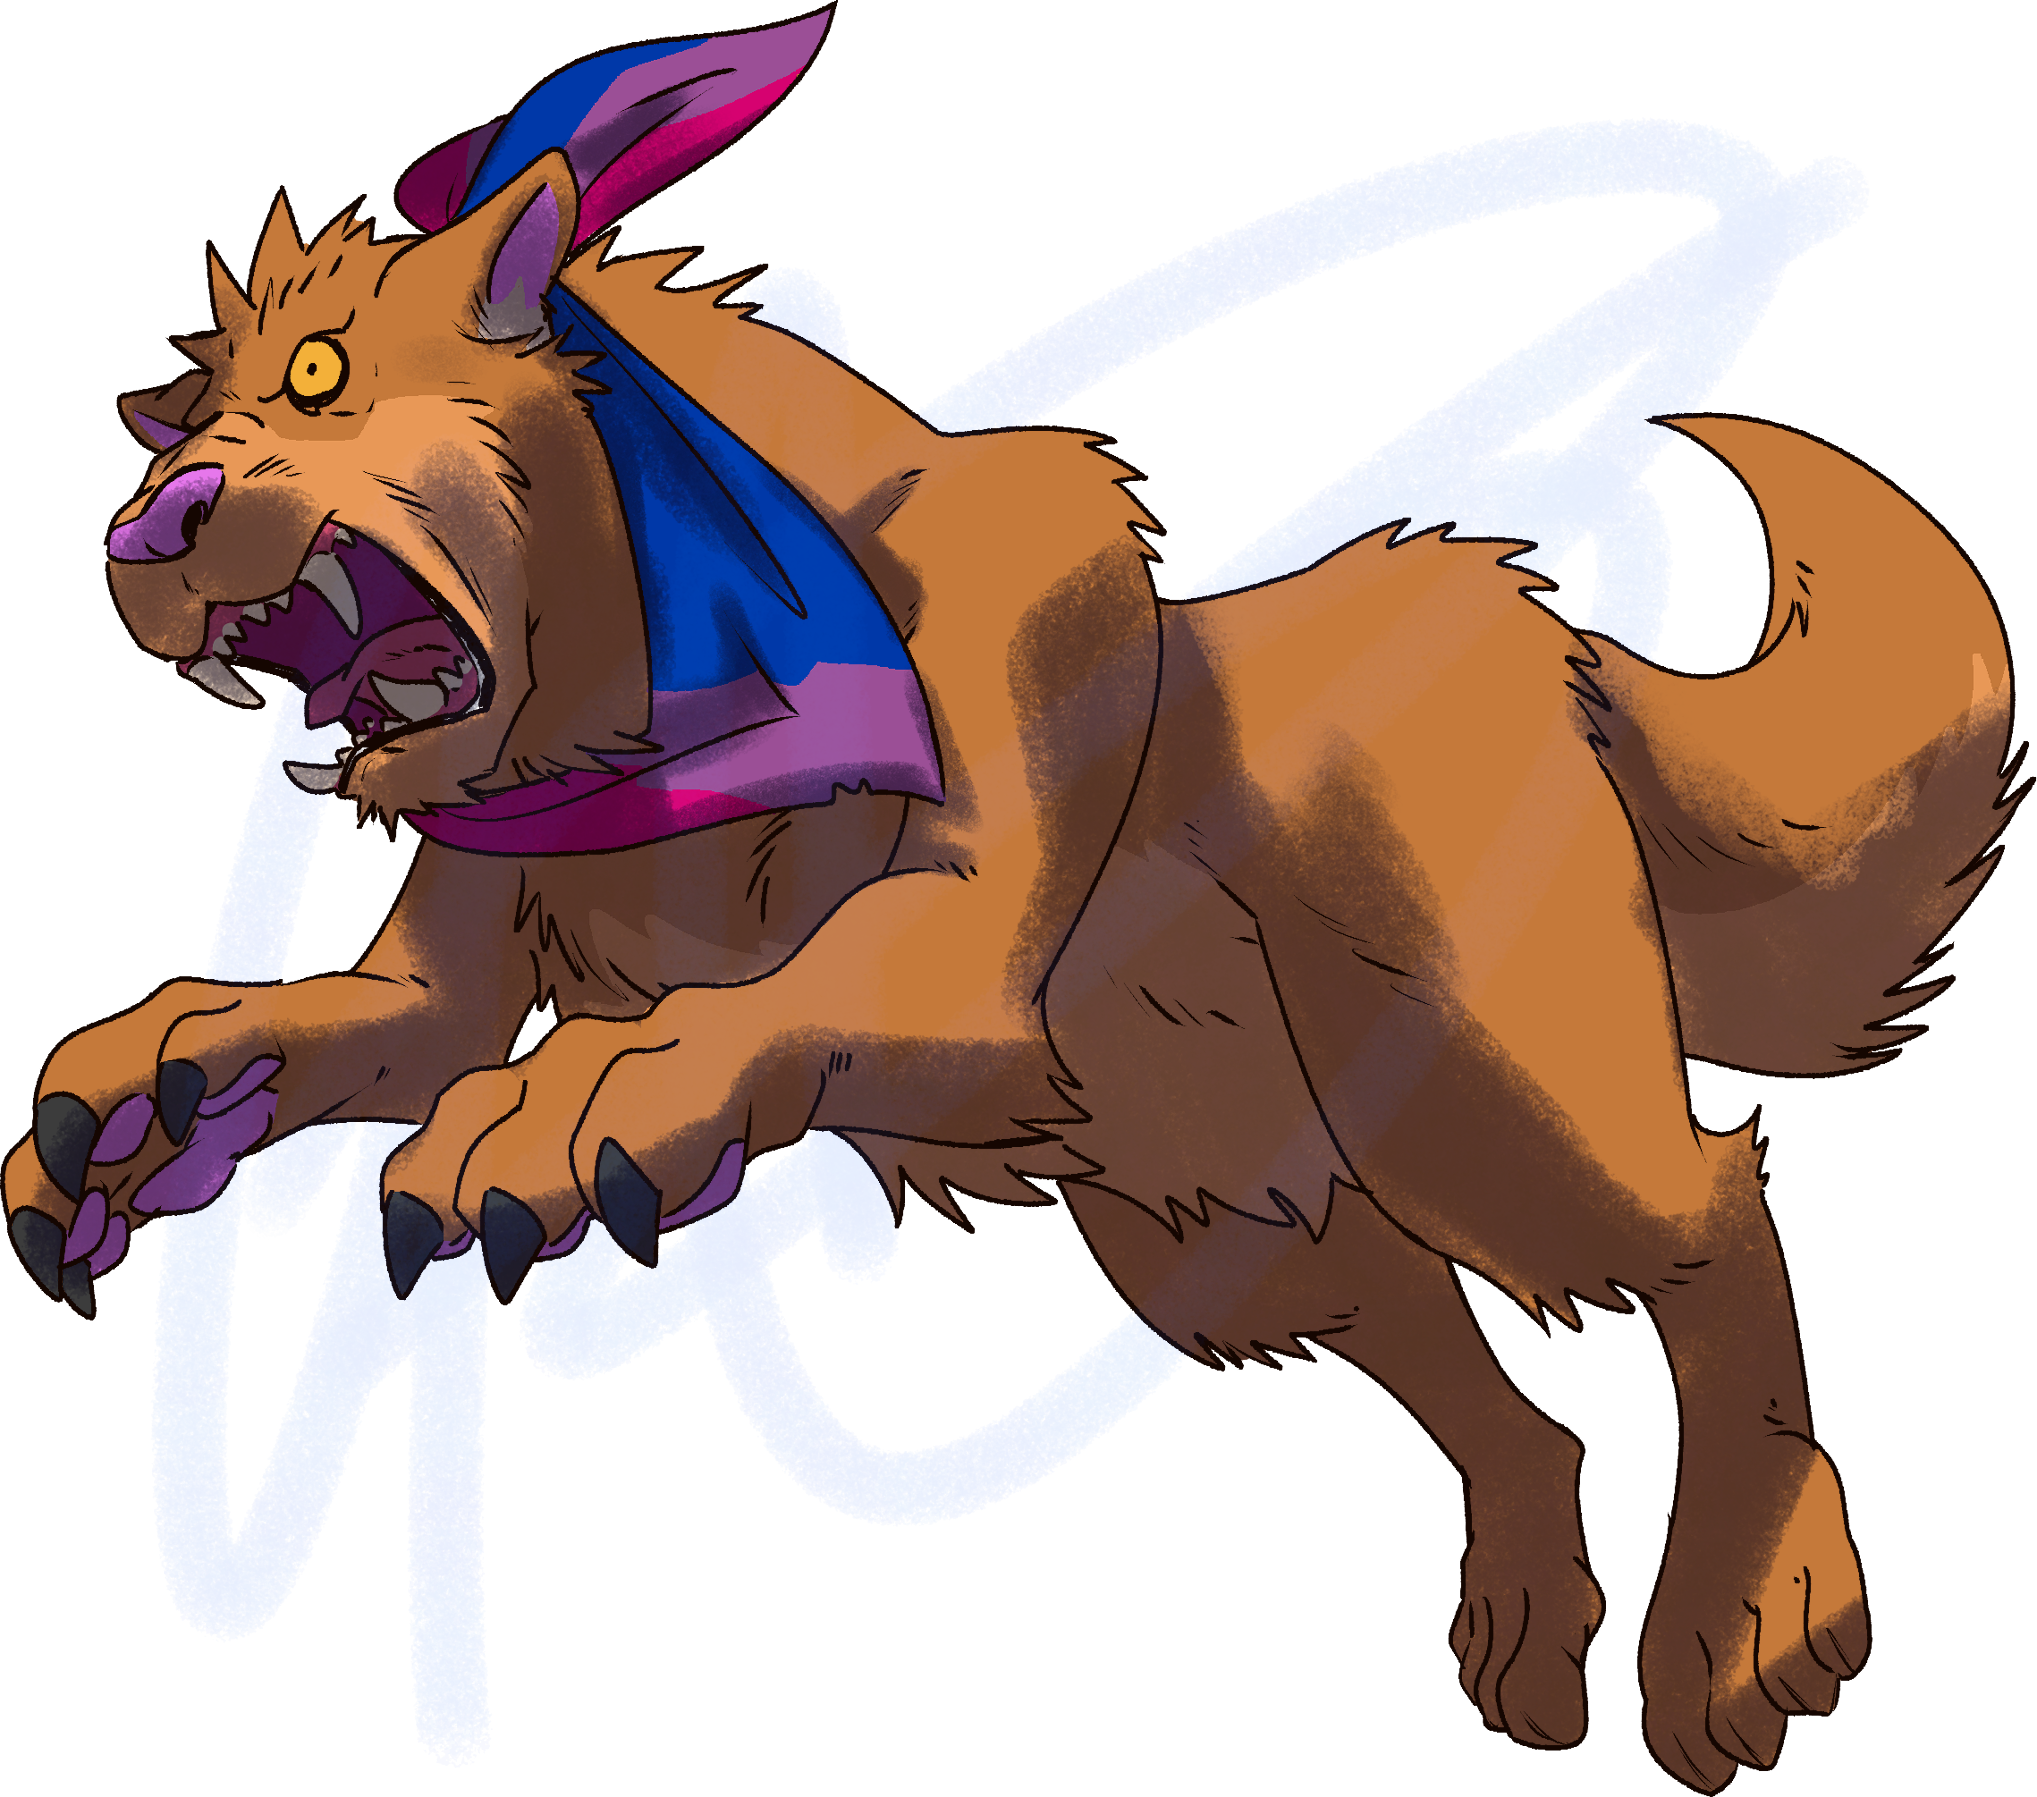 A fursona image themed "Fight with Pride". A feral orange catdog pouncing to the left, his teeth bared, with a bi flag cape draped over his neck.